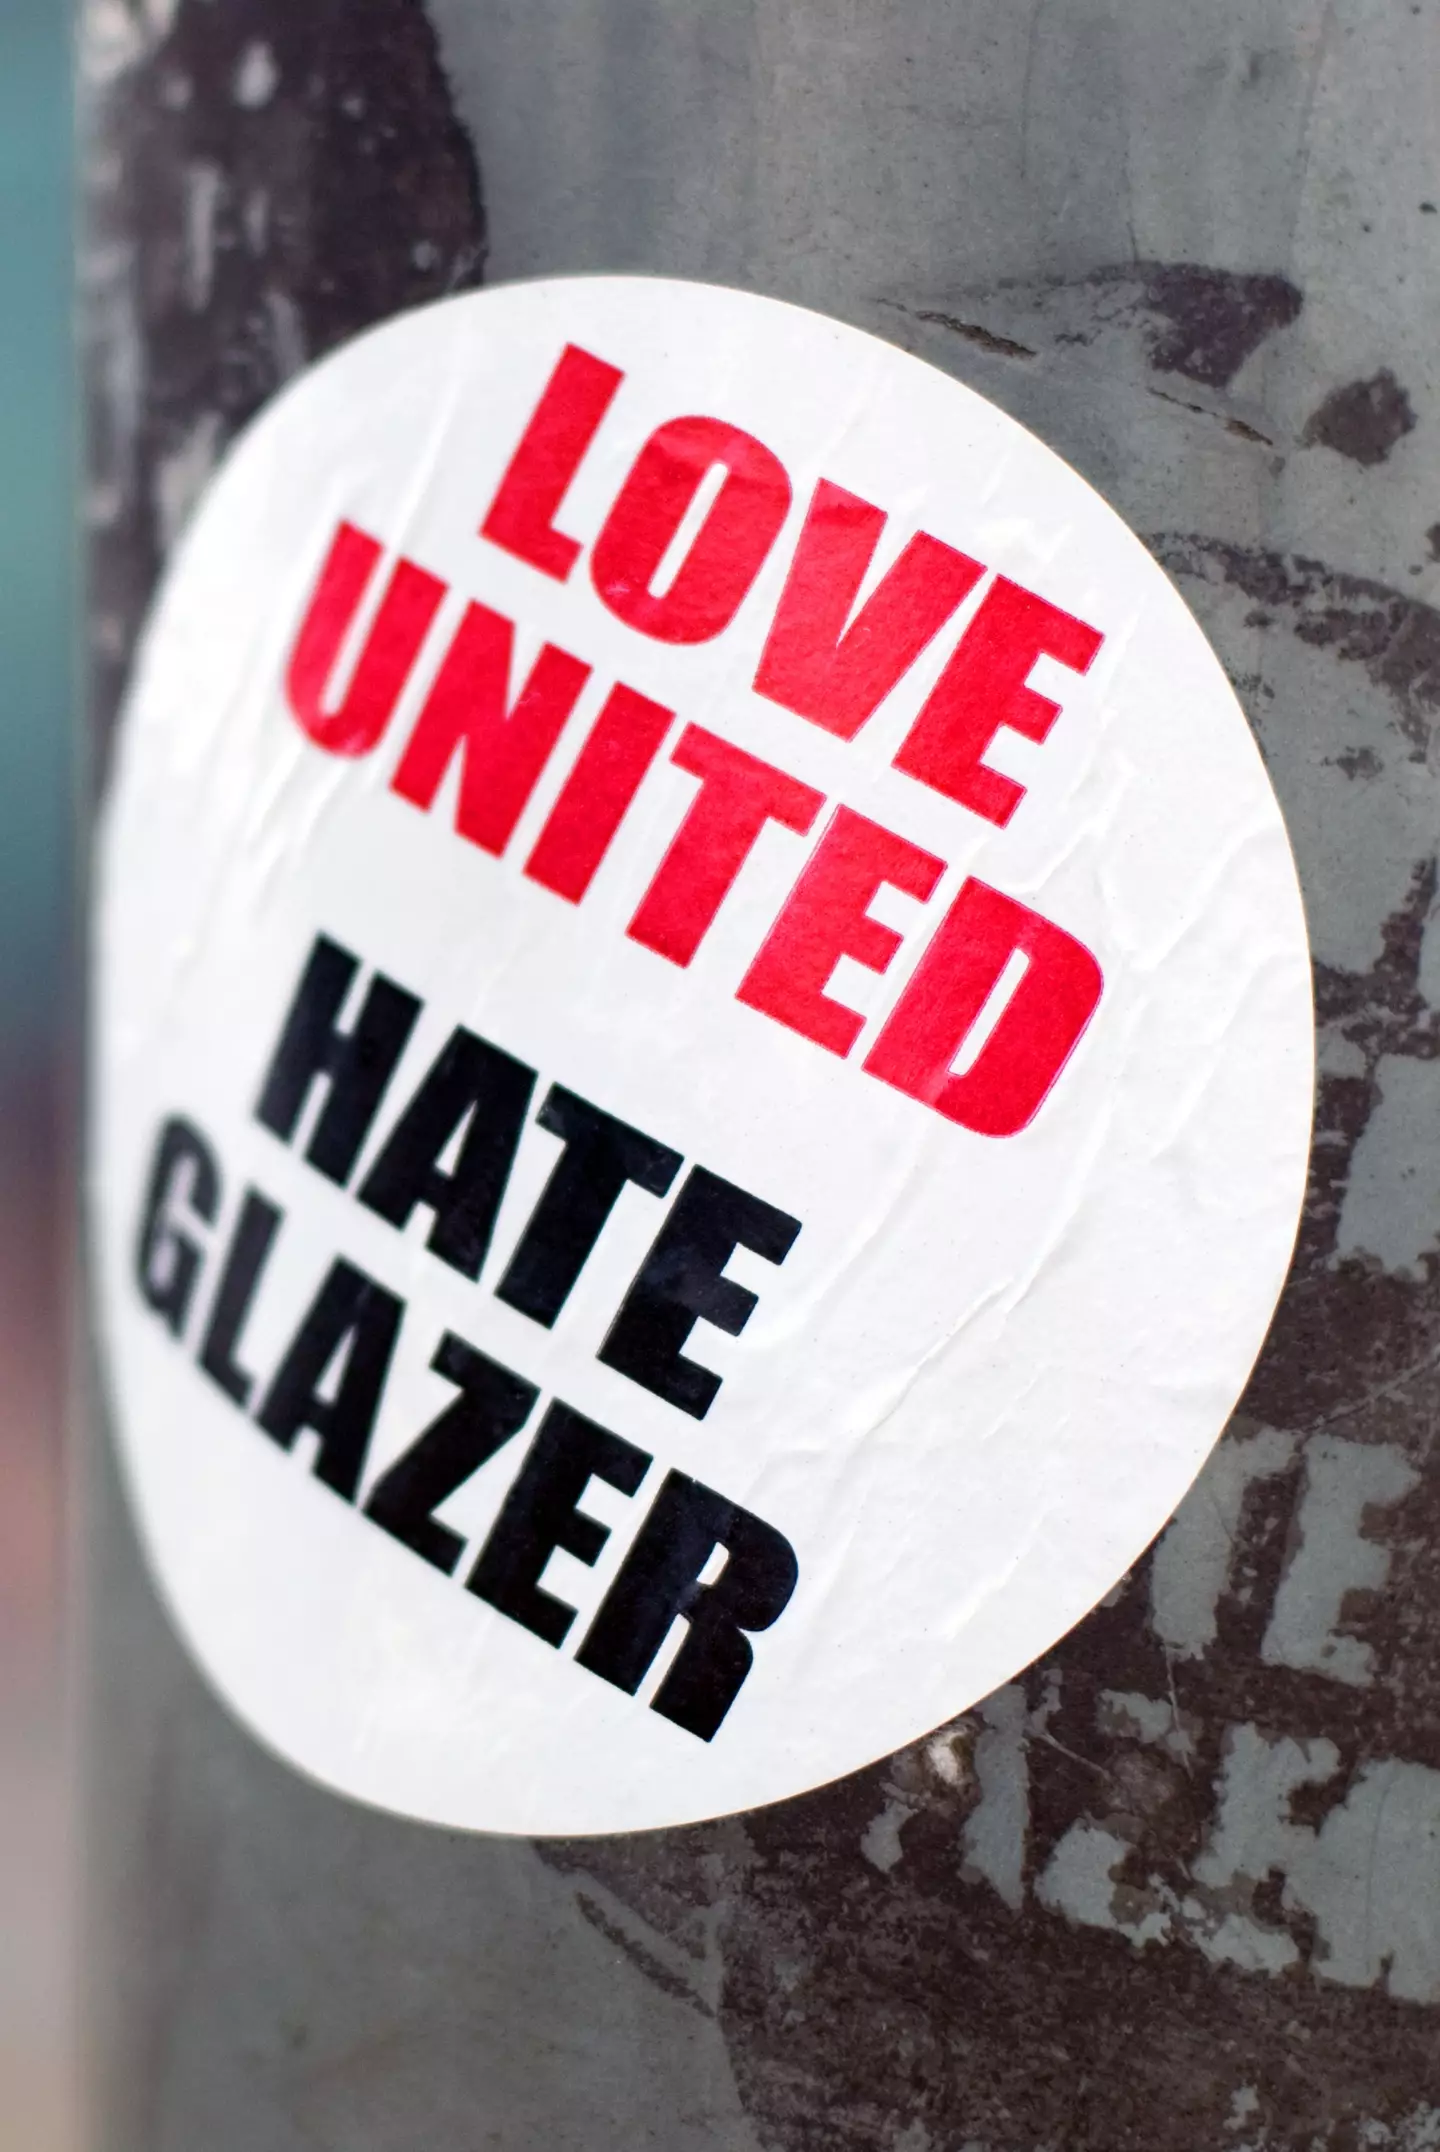 "Love United Hate Glazer" has become a staple of the Manchester United community. (Alamy)